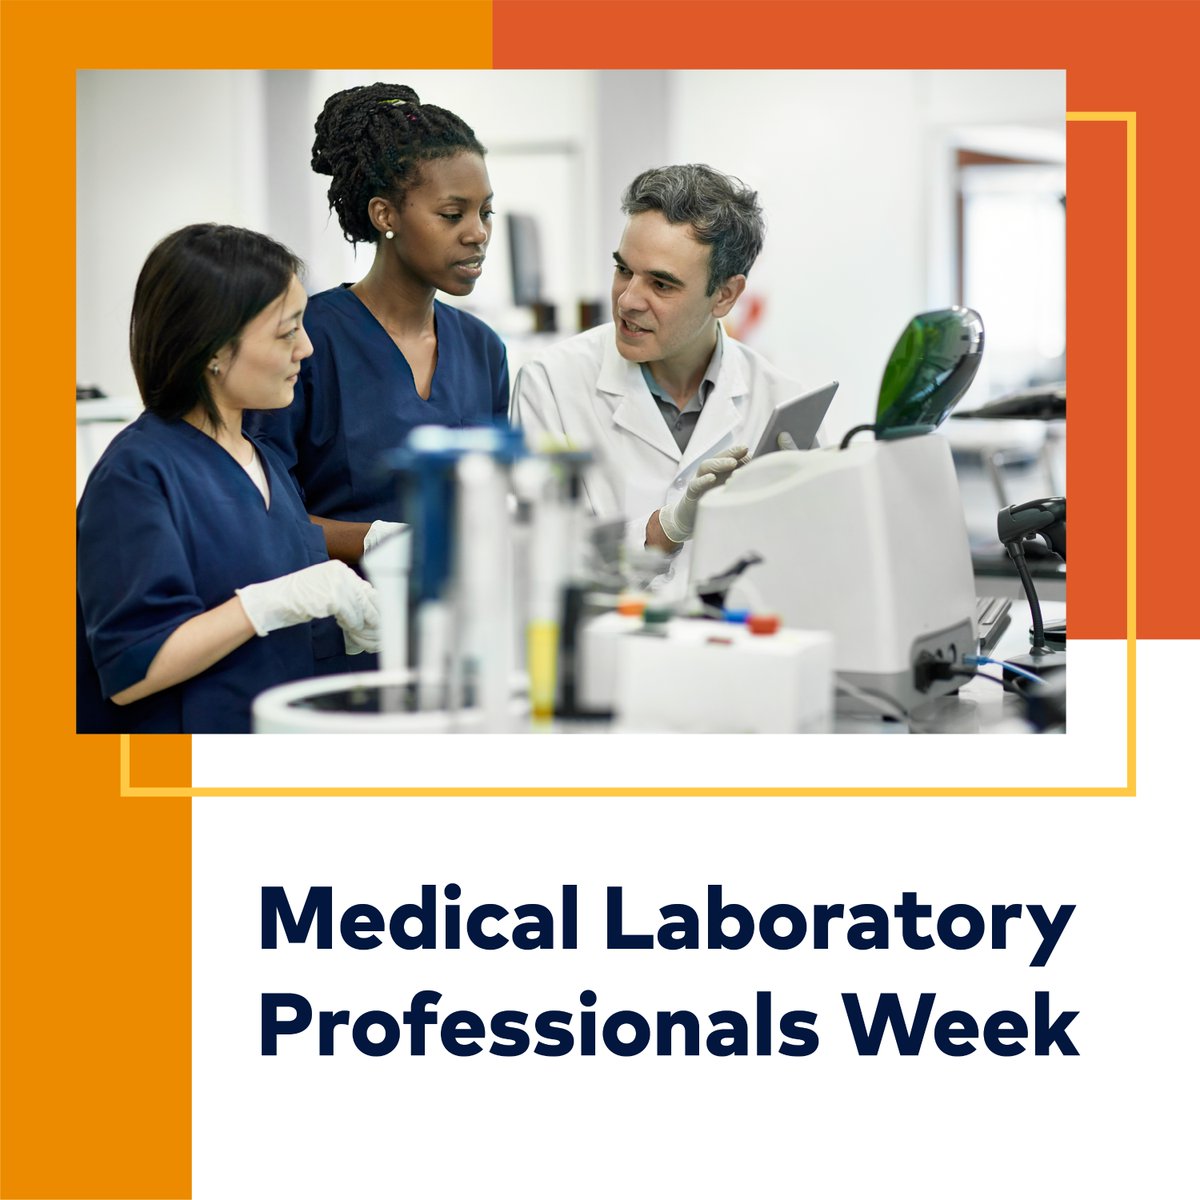 Happy Medical Laboratory Professionals Week to the laboratorians and pathologists at HealthONE and our larger @HCAHealthcare network. We celebrate the important team members who help improve the lives of our patients and communities. #CareLikeFamily #LabWeek24